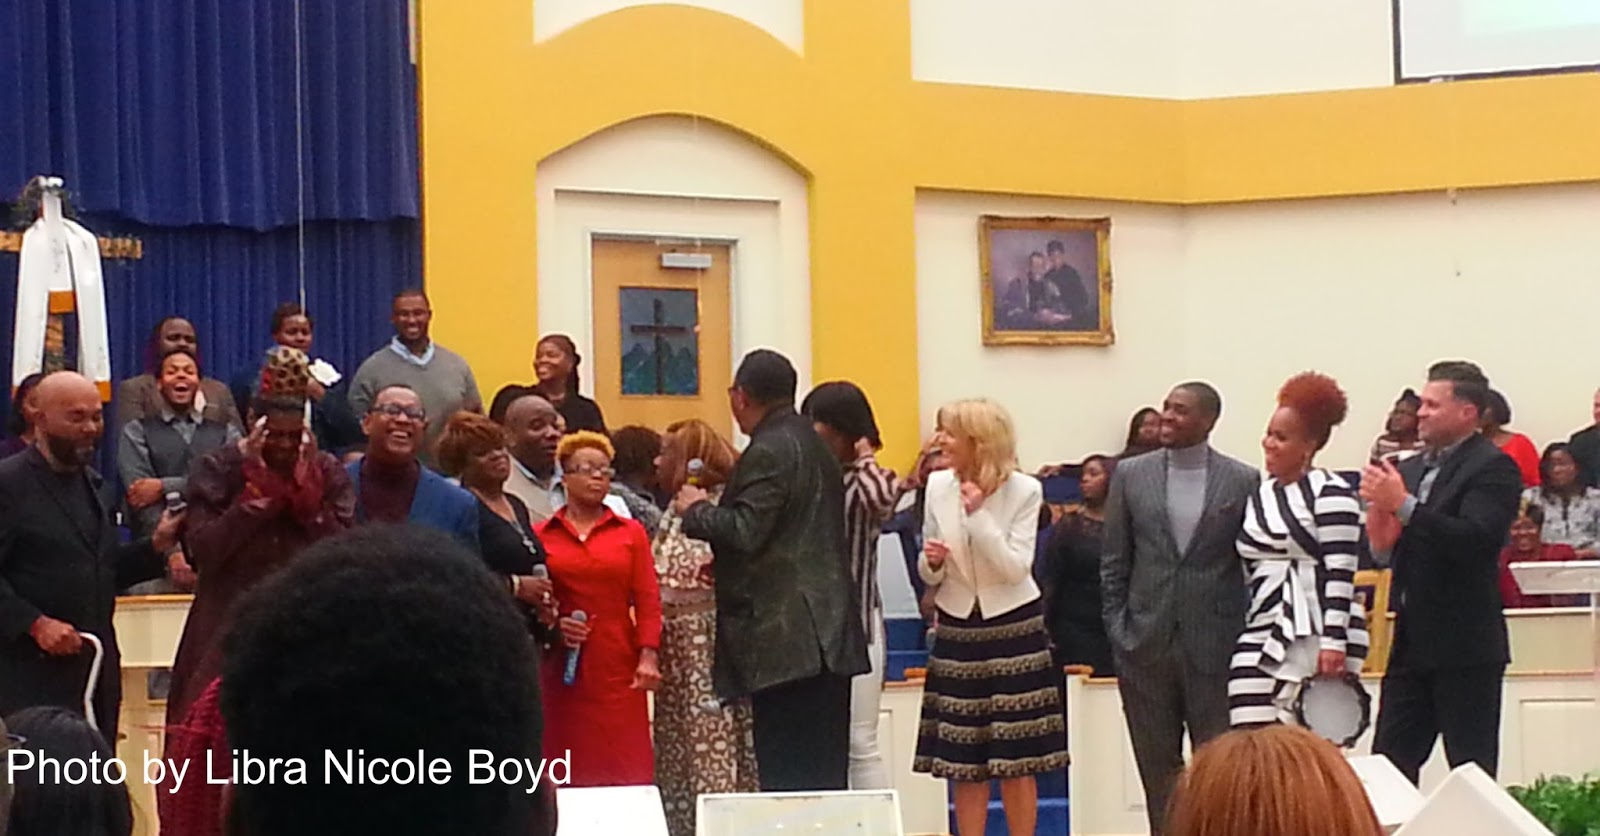 Dr. Bobby Jones (front) with (left to right): Bernard Sterling, Biddy Newborn, Melvin Williams, Tammy Caesar, Anthony Hill, LeDehra Alston, Beverly Crawford, Le'Andria Johnson, Ami Rushes, Teddy Campbell, Tina Campbell, Wess Morgan, and Mt. Calvary Word of Faith Choir (background). Not pictured: Arie Pope.